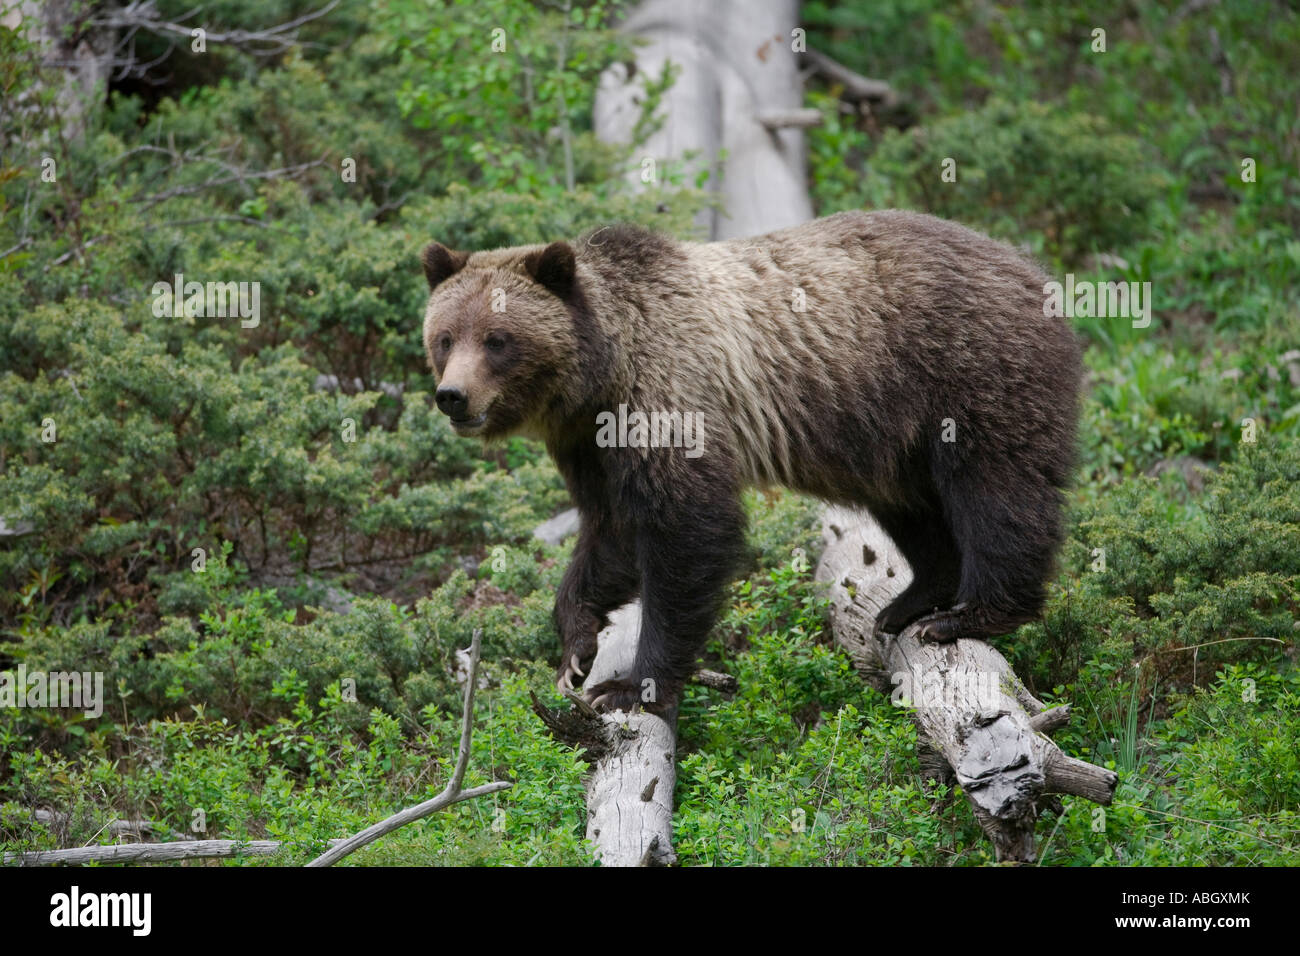 Grizzly bear, Yellowstone National Park, Wyoming Stock Photo